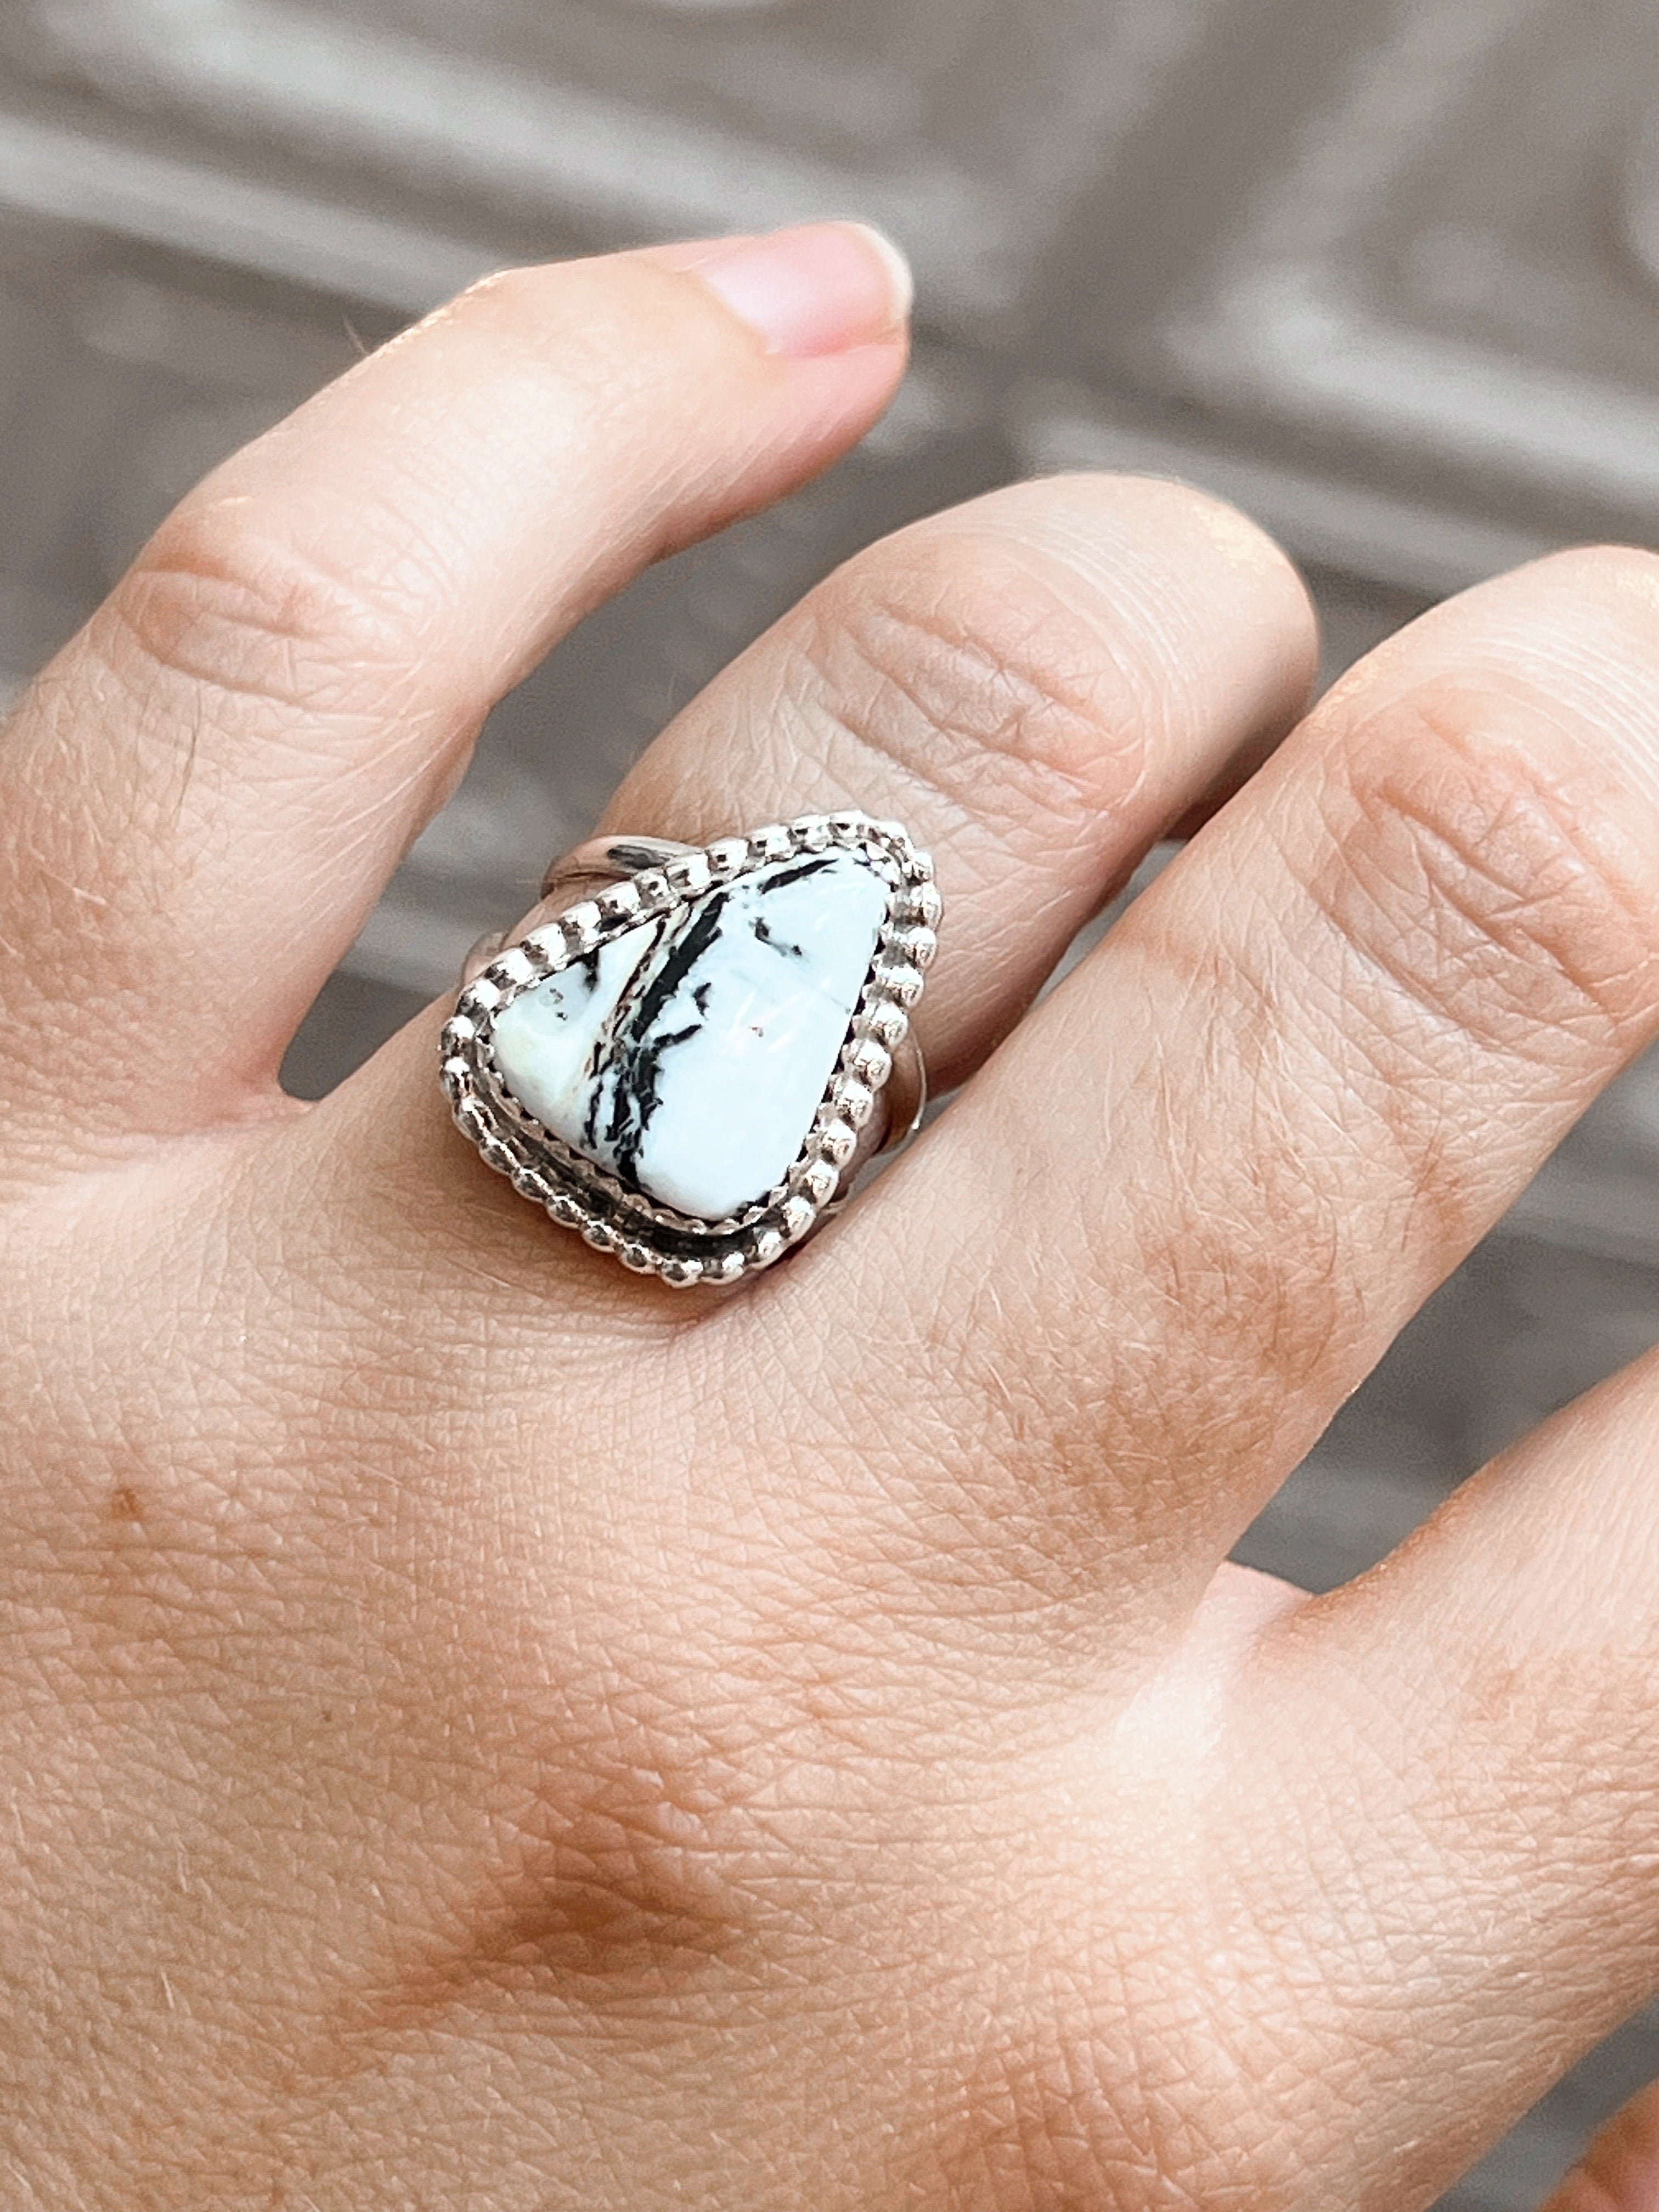 Wild White Buffalo Sterling Silver Ring